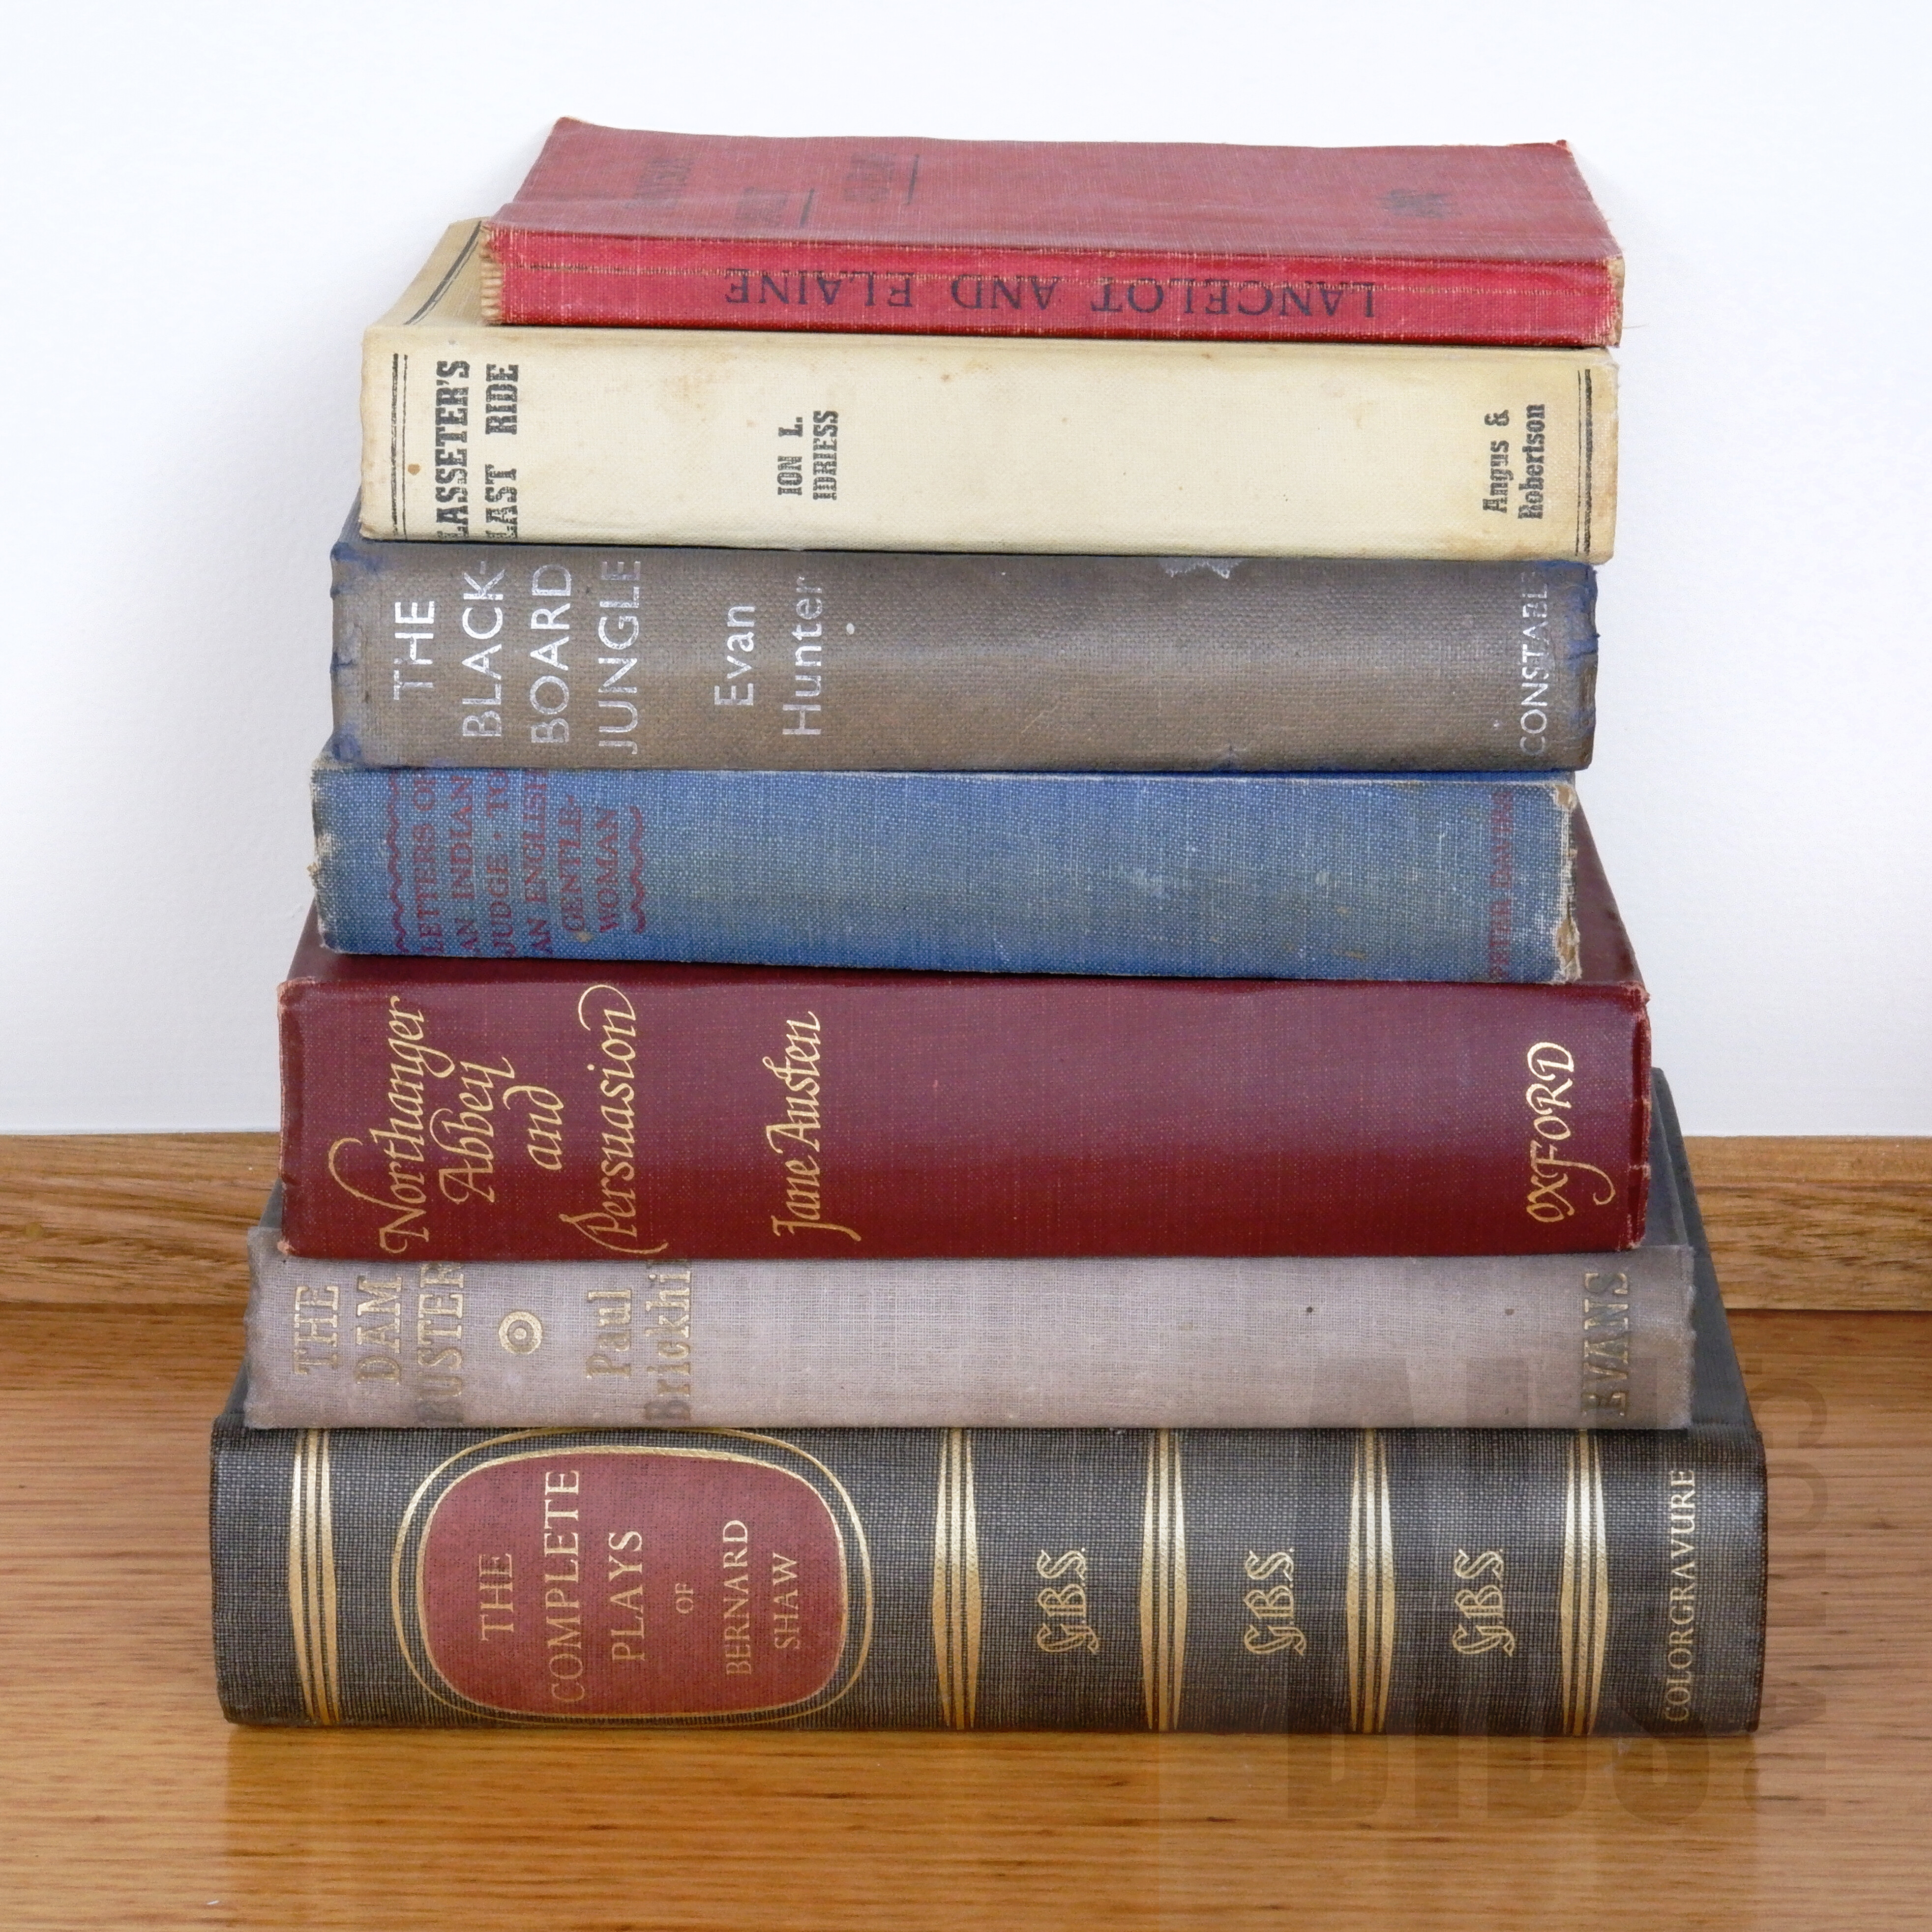 'Collection of Antique and Vintage Books, Including Ion Idriess Lasseters Ride 1942 and More'